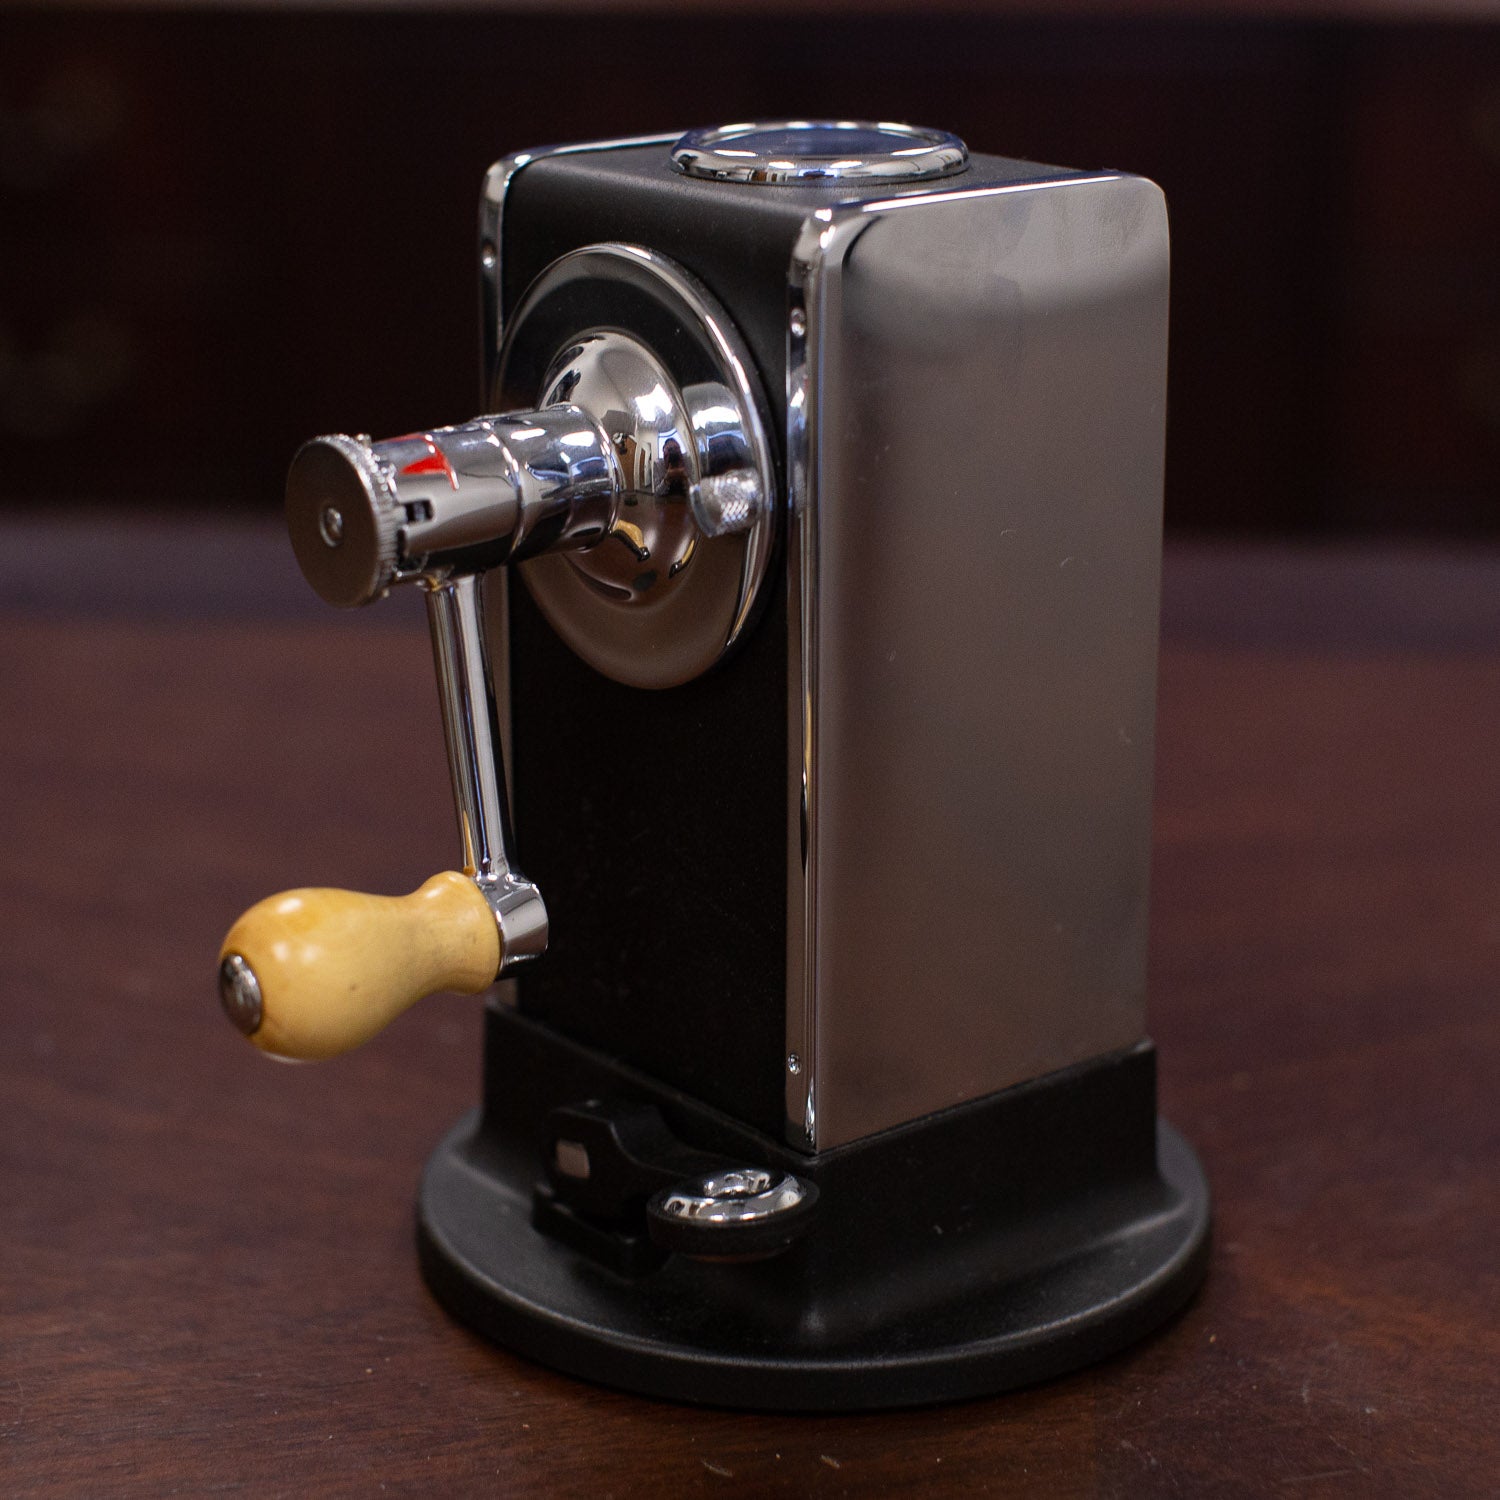 A small El Casco M-430 Pencil Sharpener sitting on a table, designed with mechanical engineering inspiration by KirbyAllison.com.